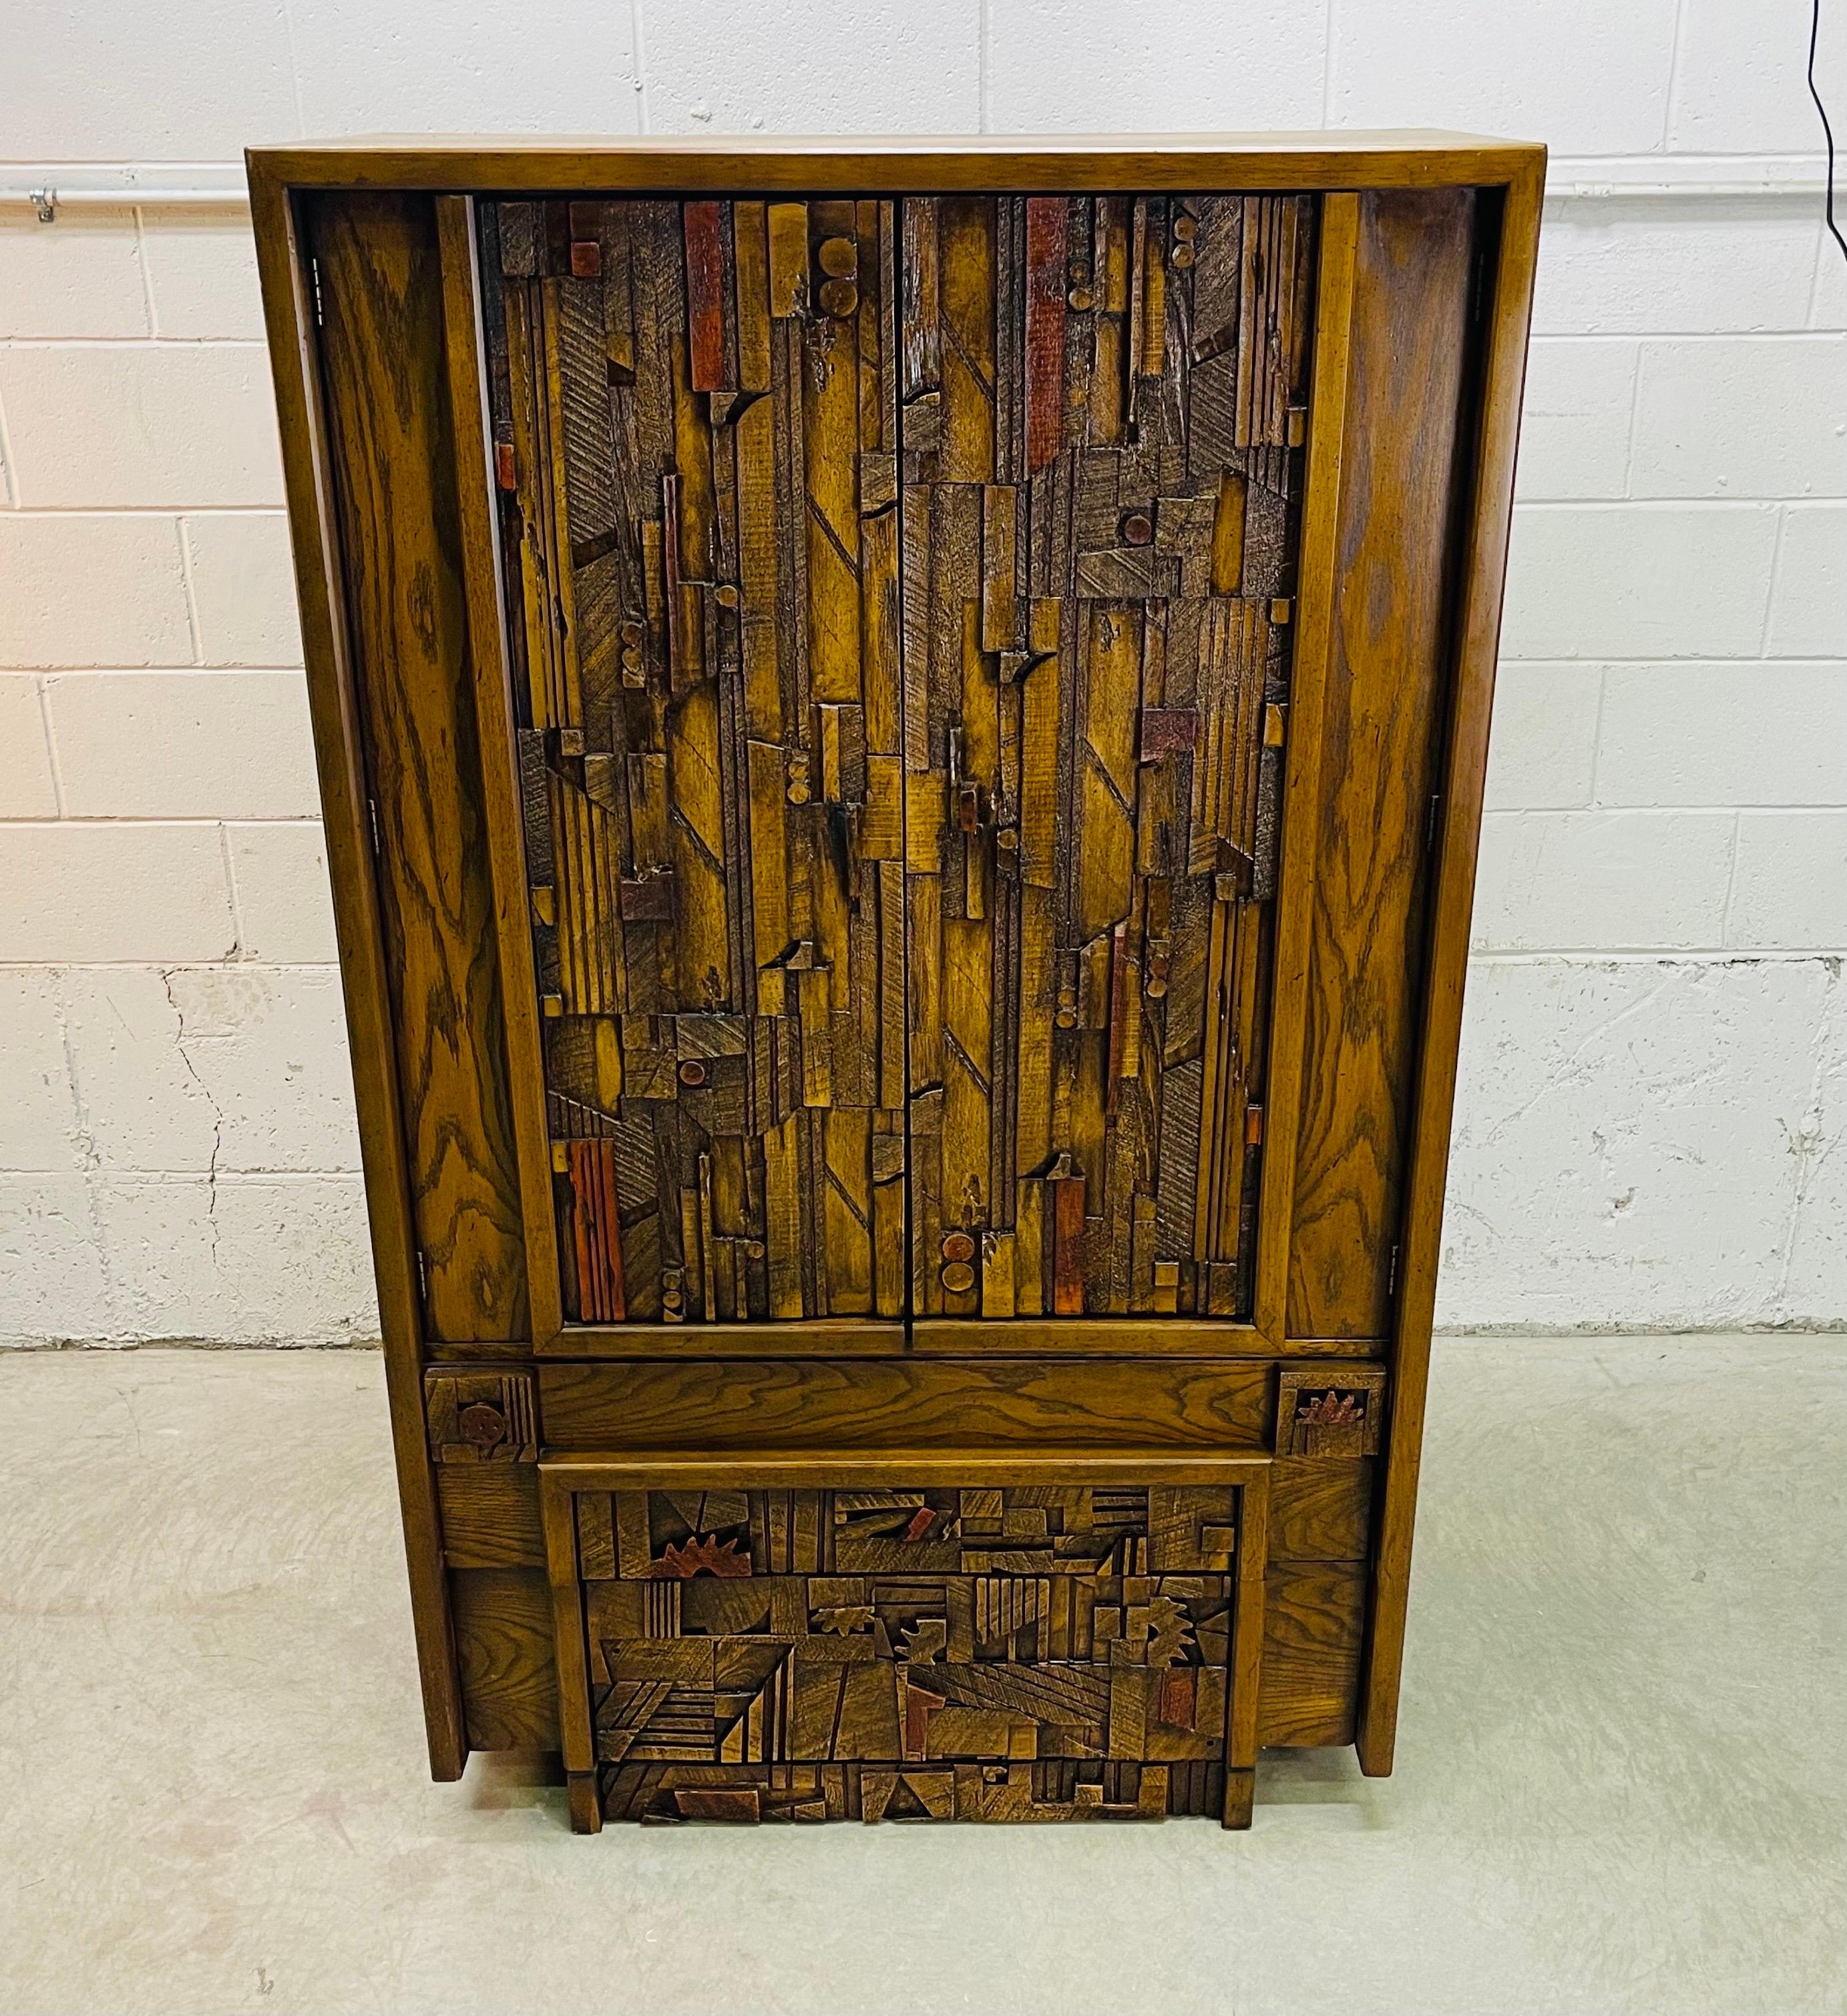 Vintage 1970s brutalist style wood armoire designed by Paul Evans for Lane Furniture Co. There are four large drawers for storage. Two drawers are 4”H and two are 6.25”H. There are also open shelves for additional storage. The exterior has the